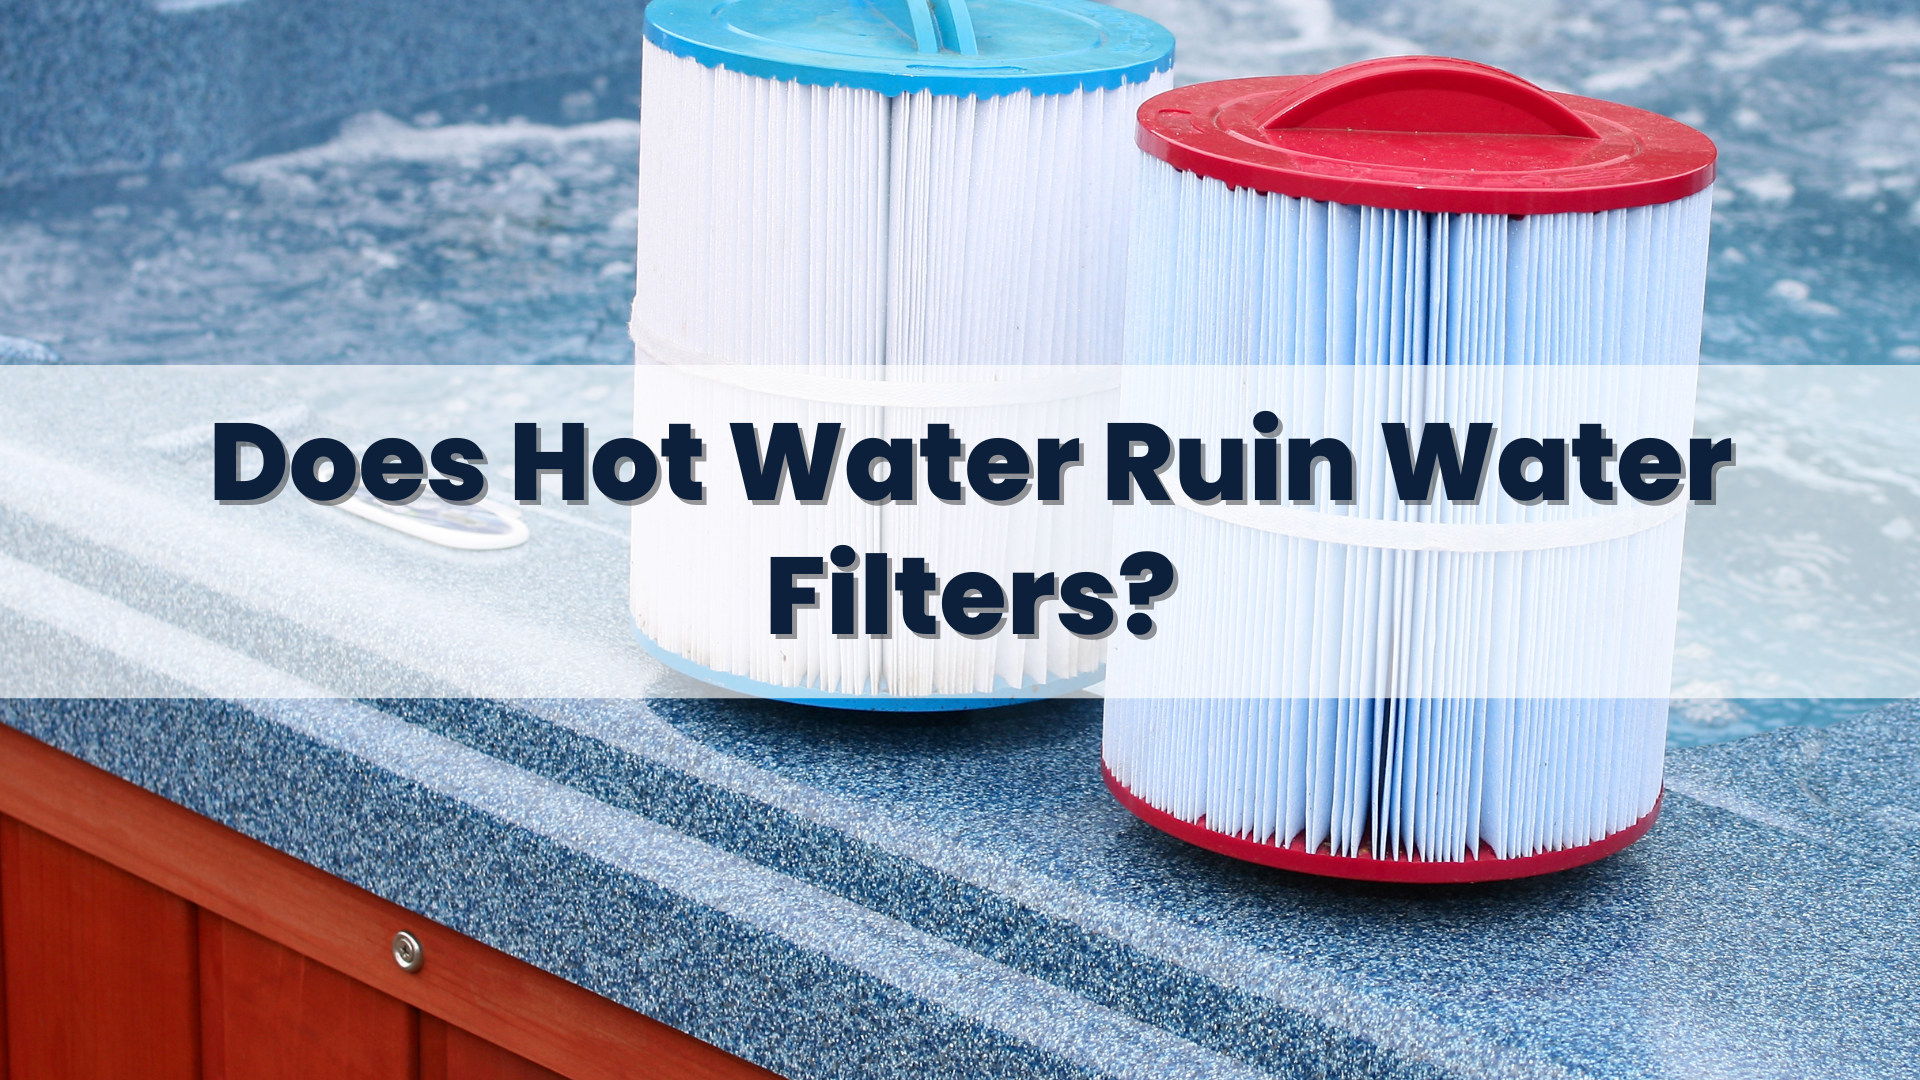 Does Hot Water Ruin Water Filters